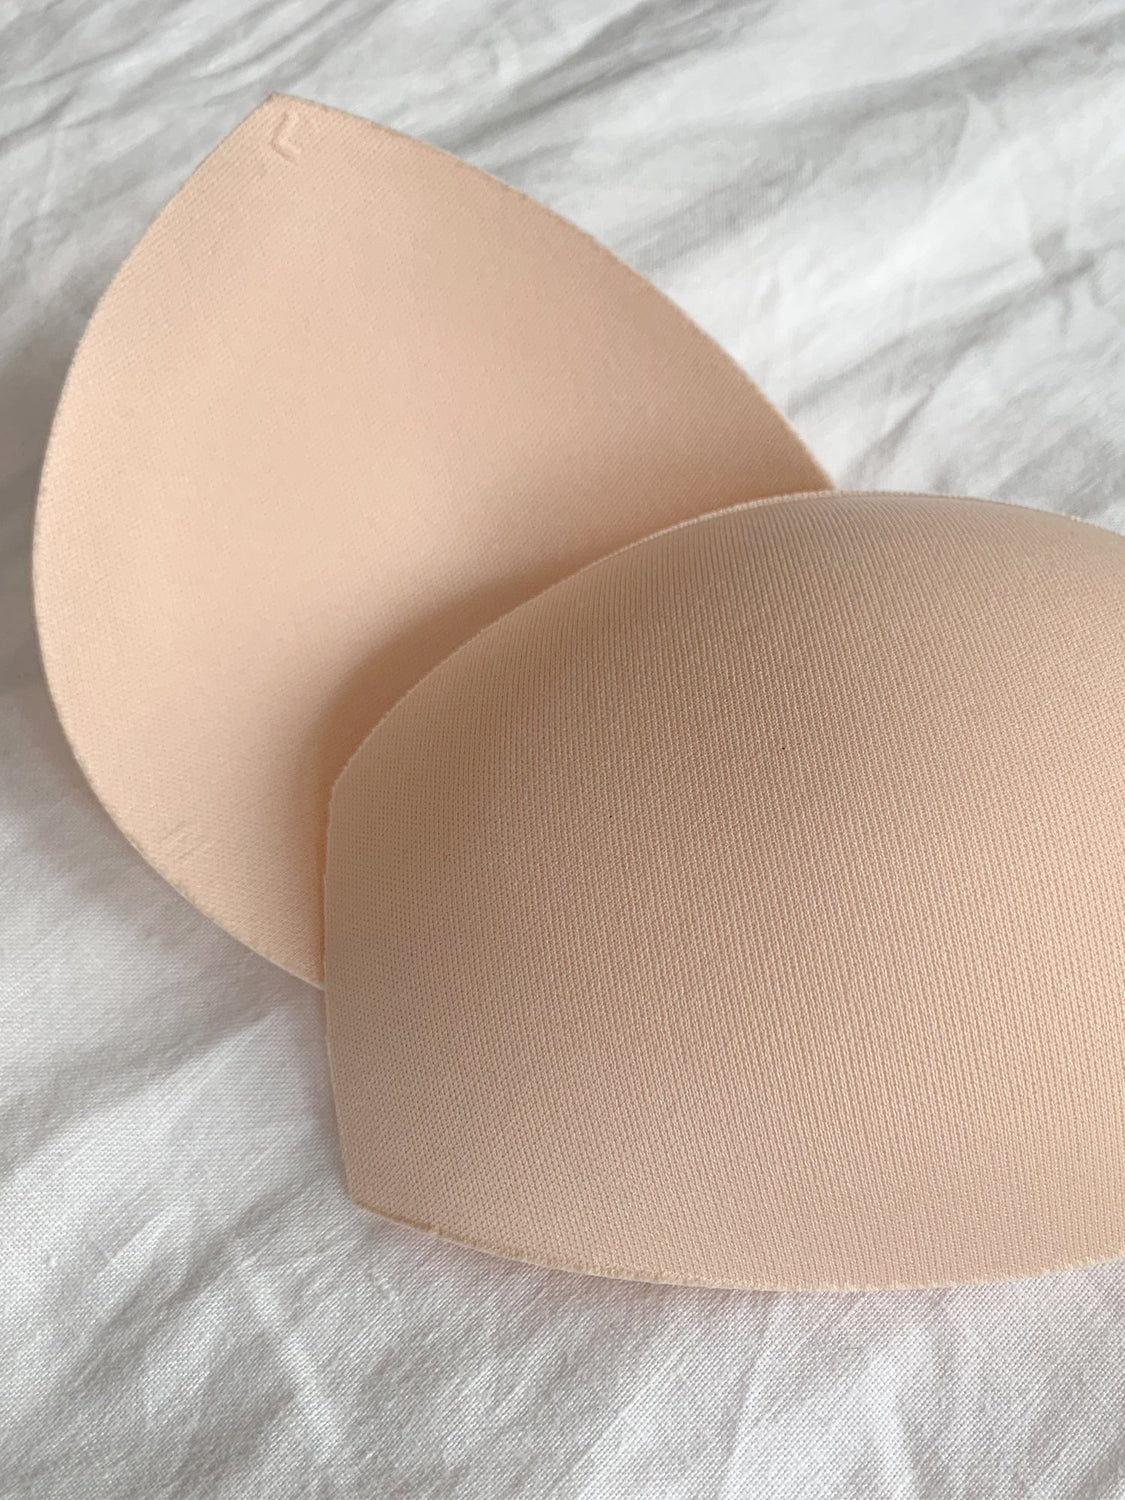 BIMEI A Pair Super Thick Bra Pads Inserts Removable Breast